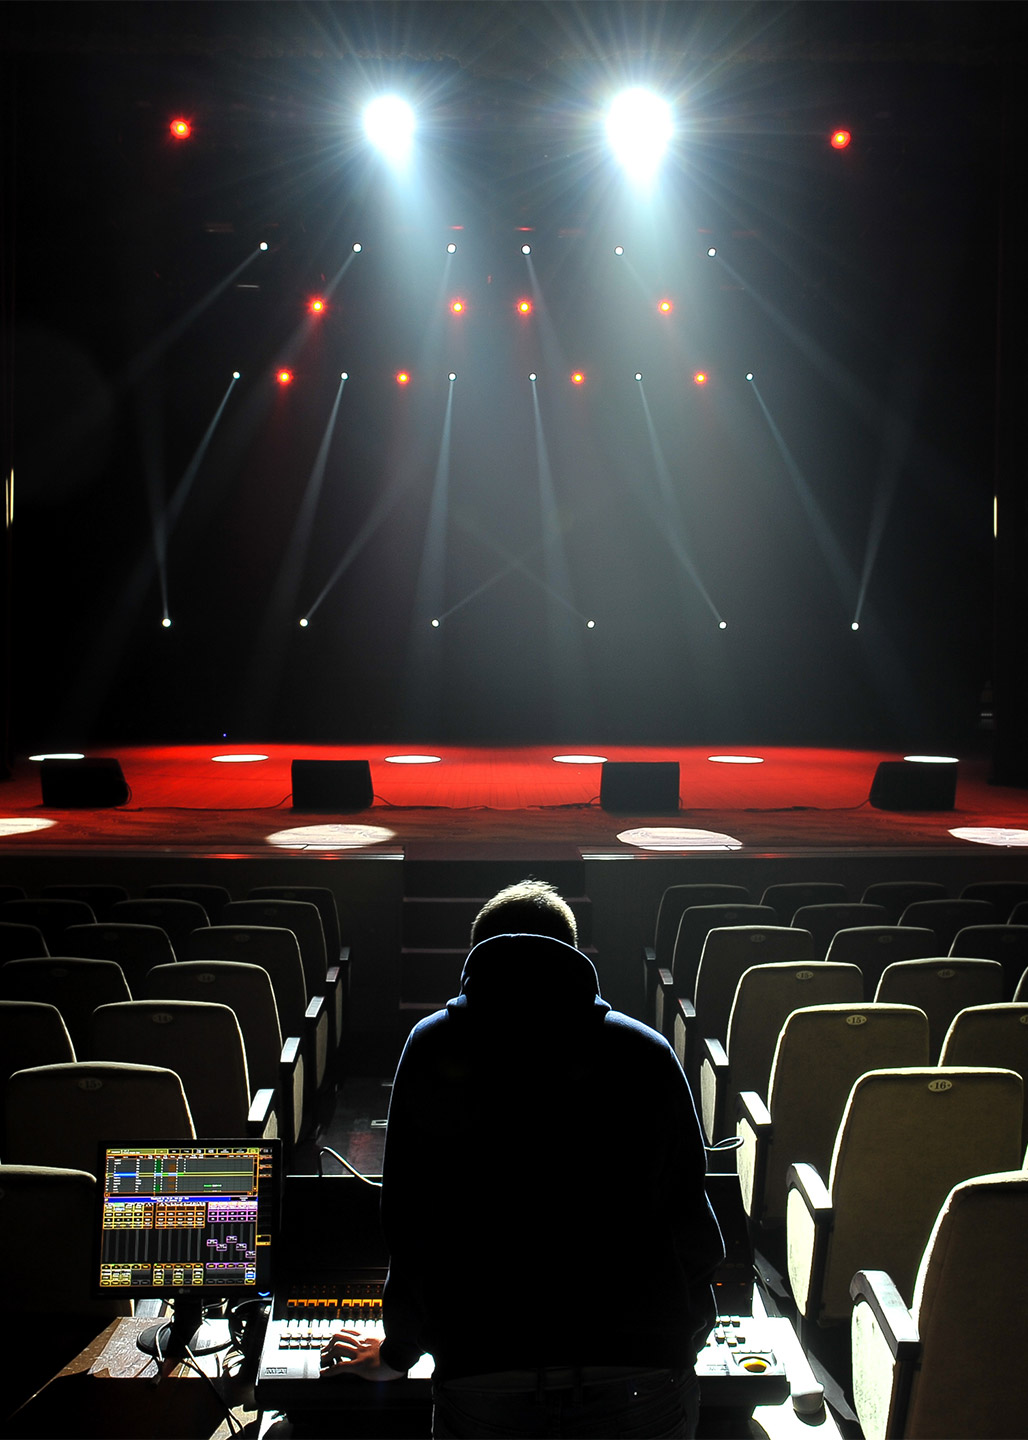 A man rehearsing the lighting for an upcoming show in an empty theatre.